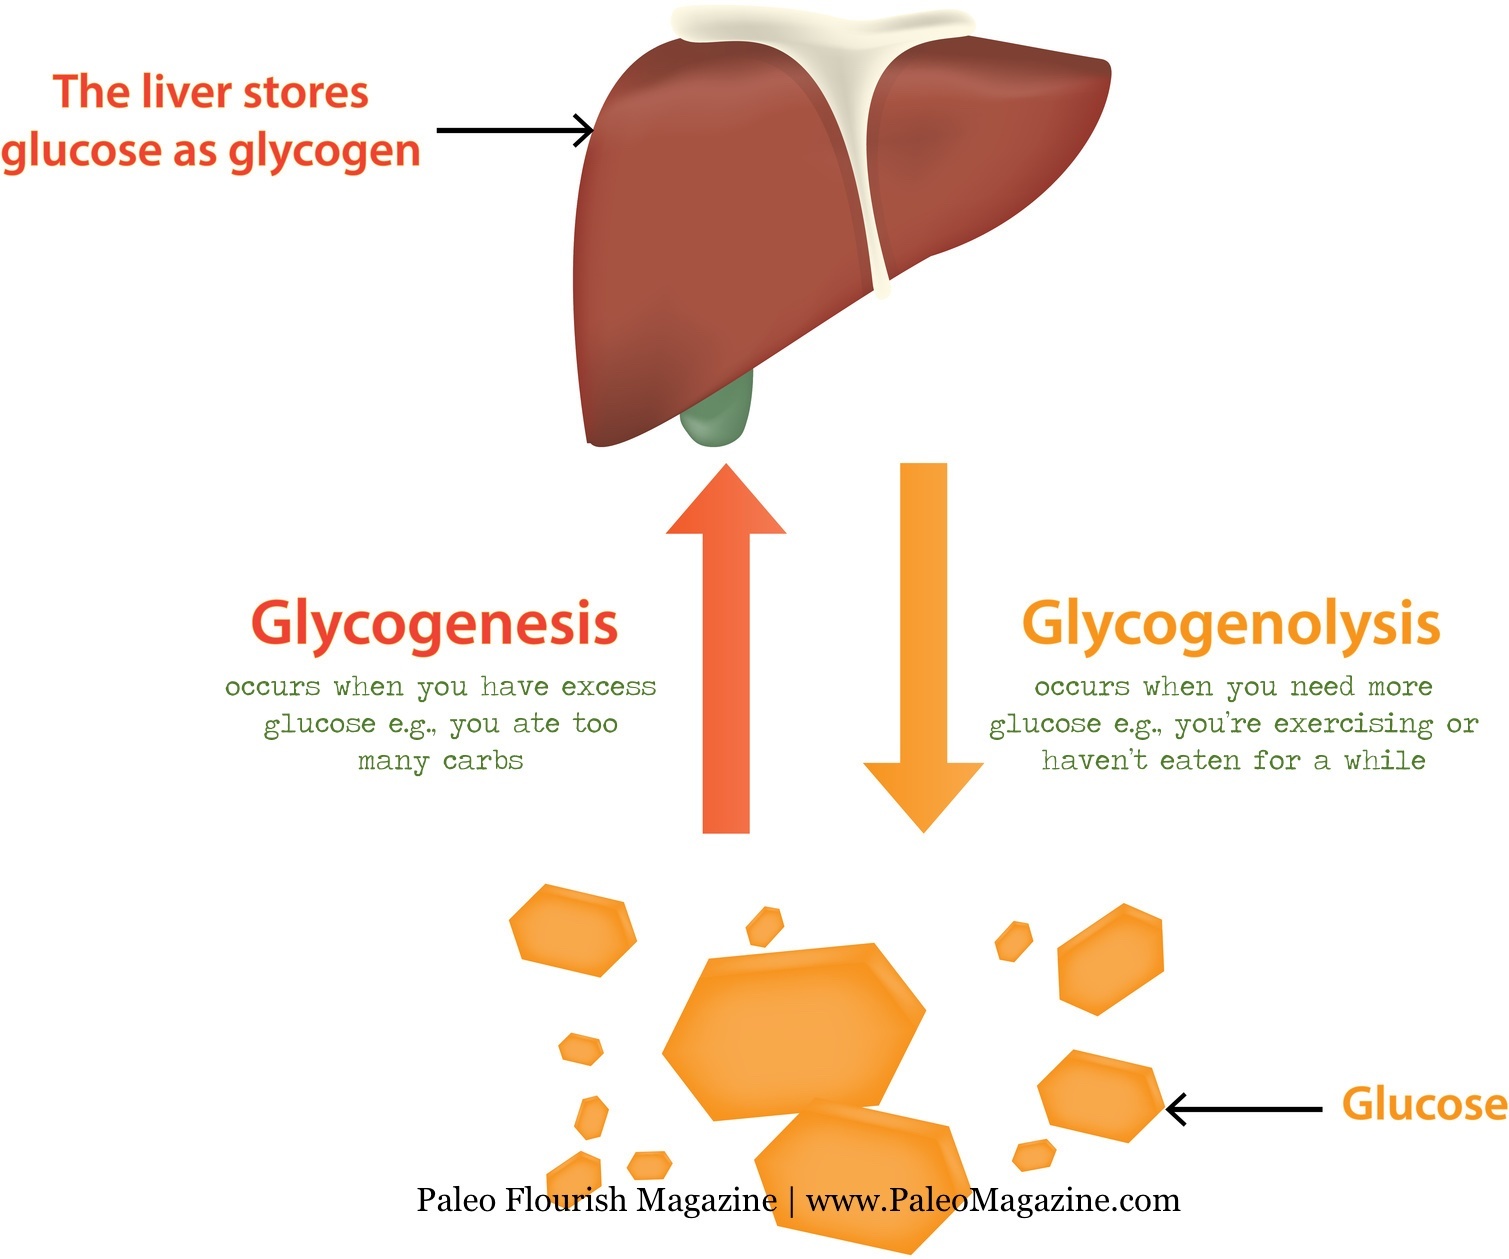 Glycogenolysis and glycogenesis - low carb diets